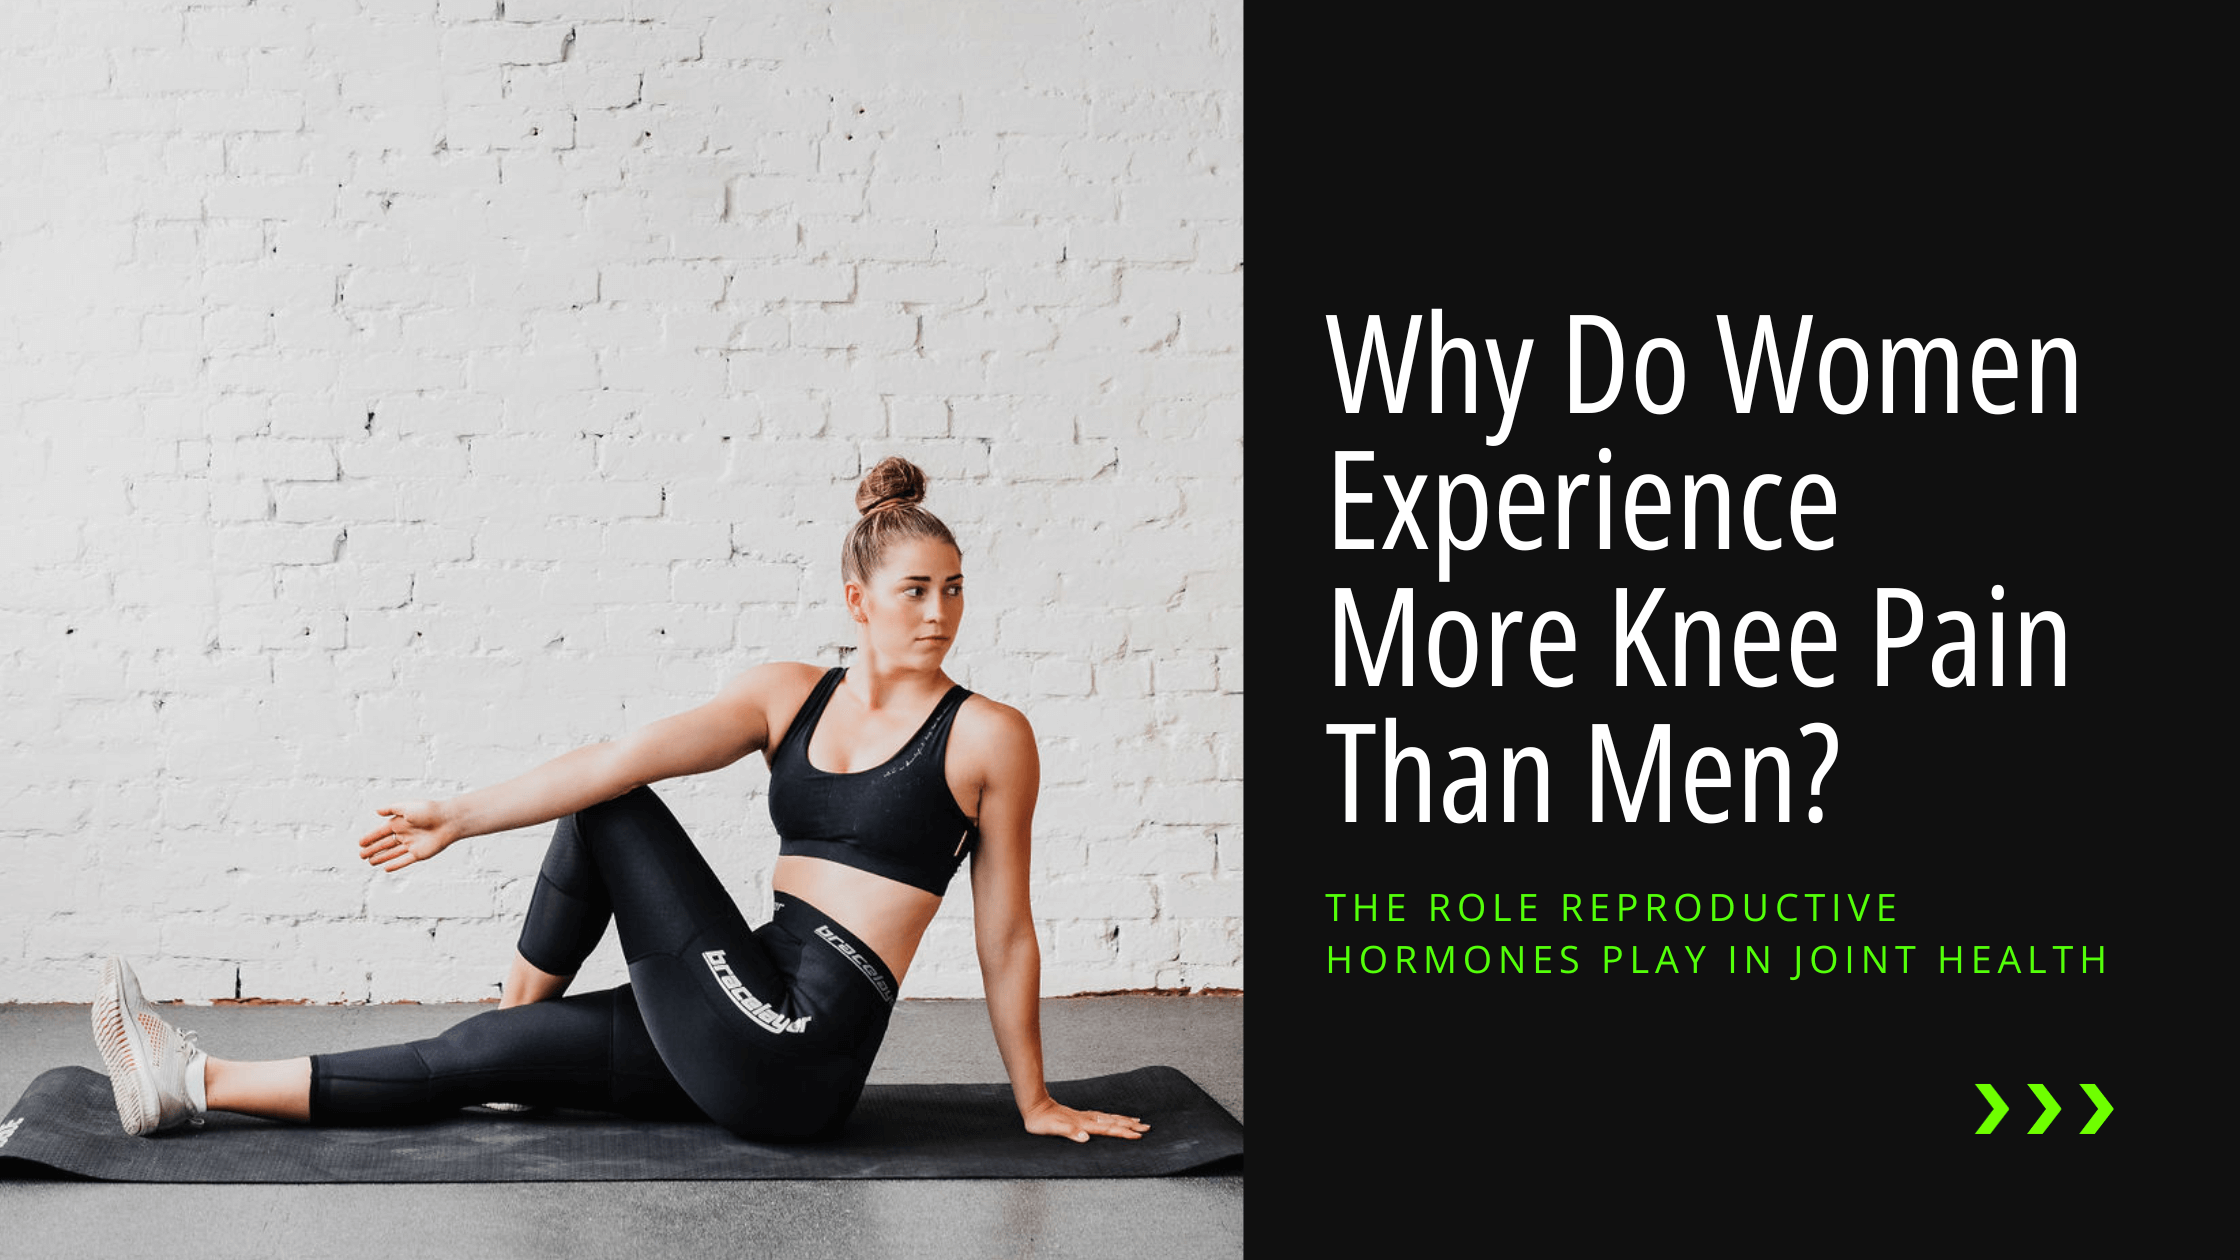 Blog header for "Why do women experience more knee pain than men?" showing a woman in a twist yoga post on the left and the heading on the right of the graphic. Knee pain pregnancy, knee pain during pregnancy, knee pain postpartum, knee pain during period